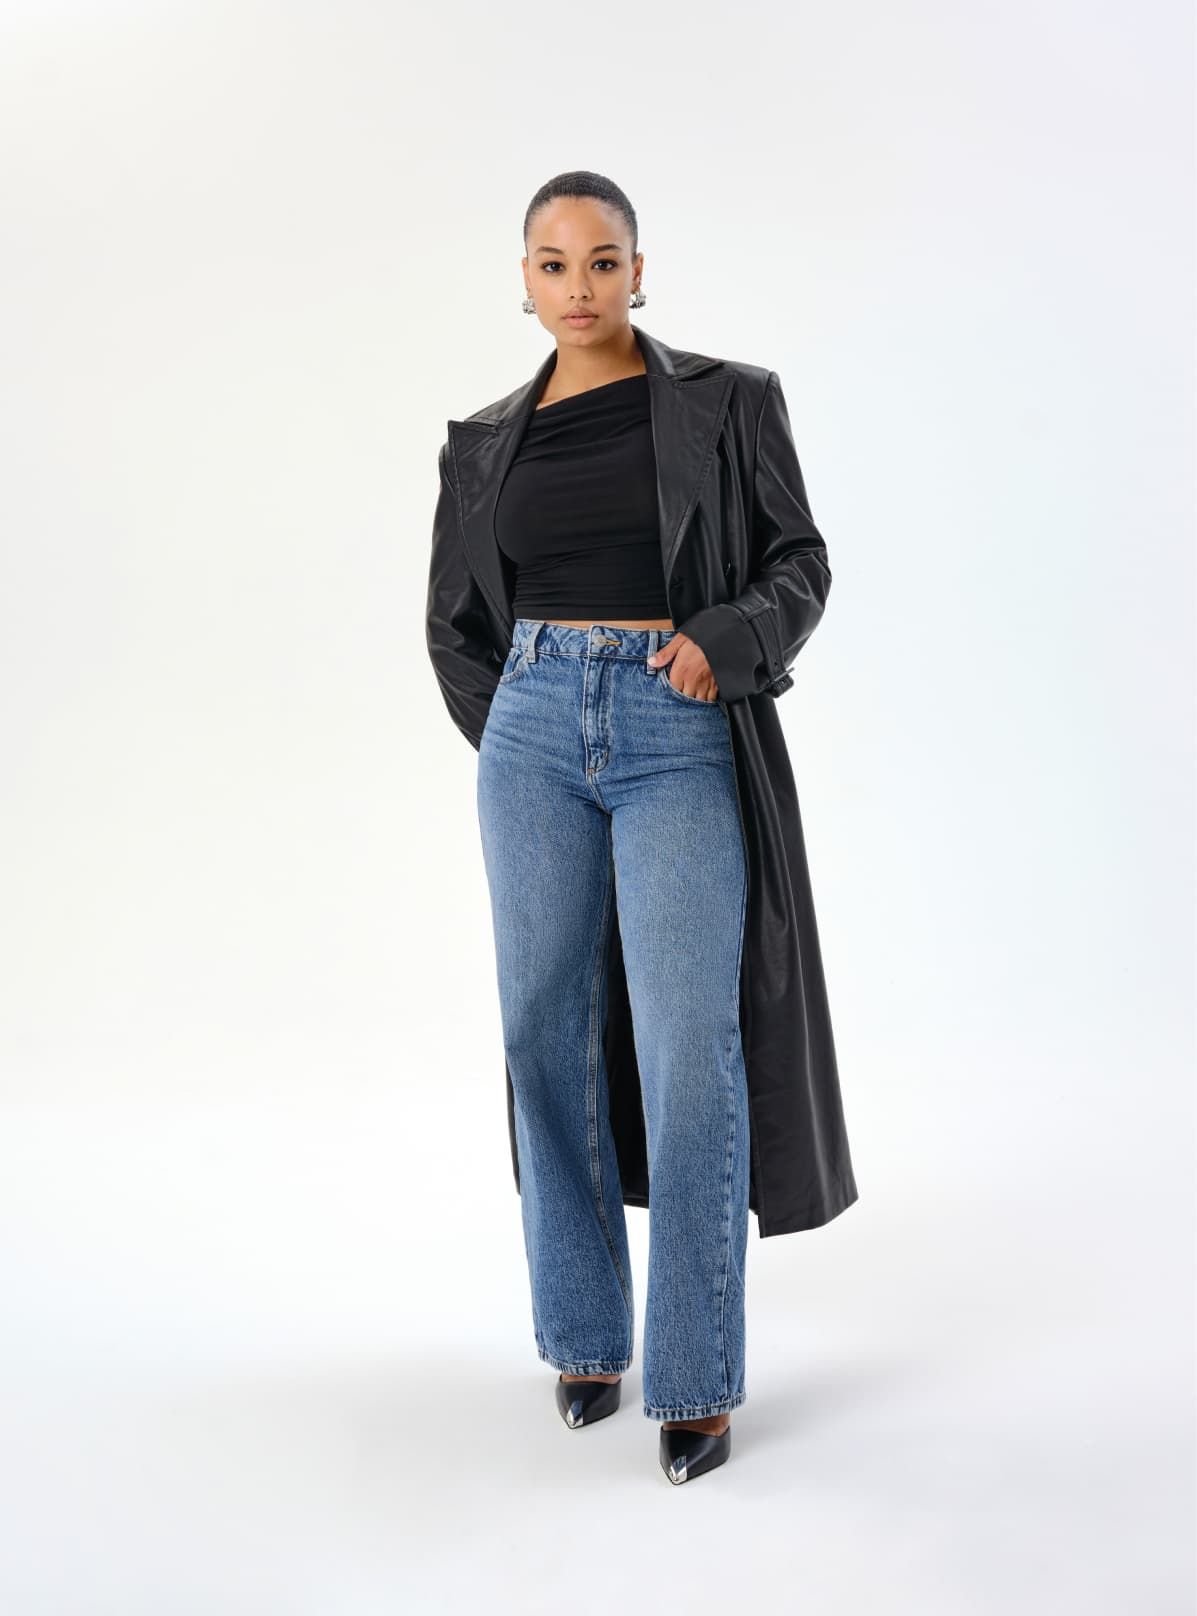 A model wears dark blue heidi jeans with a black shirt and a black long trench coat.